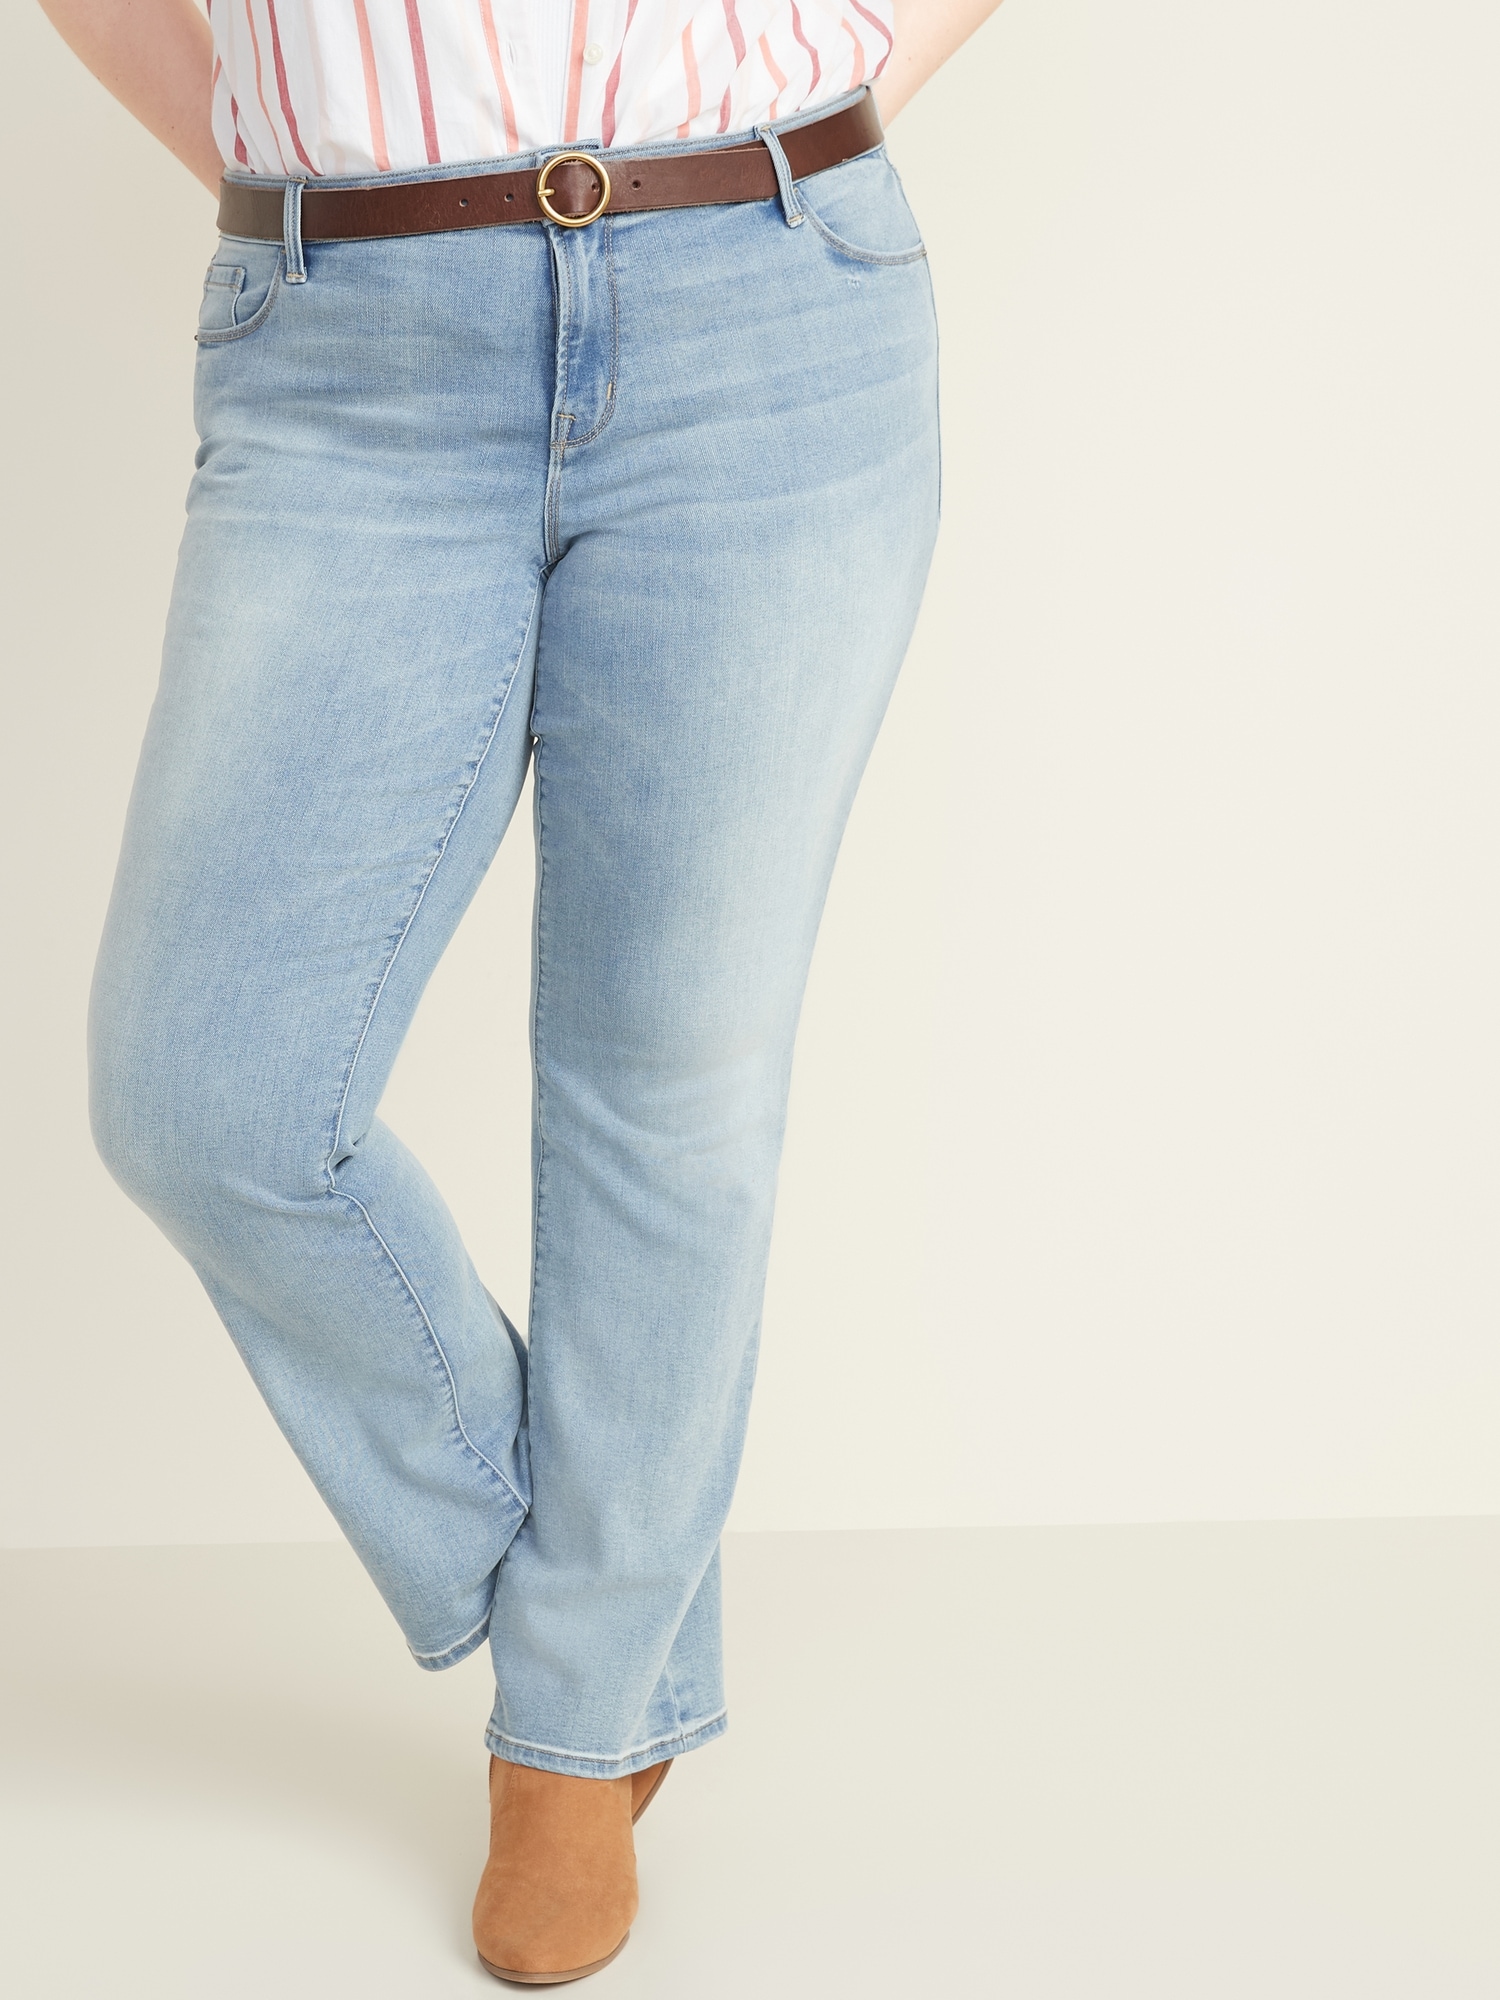 Buy > low rise plus size jeans > in stock